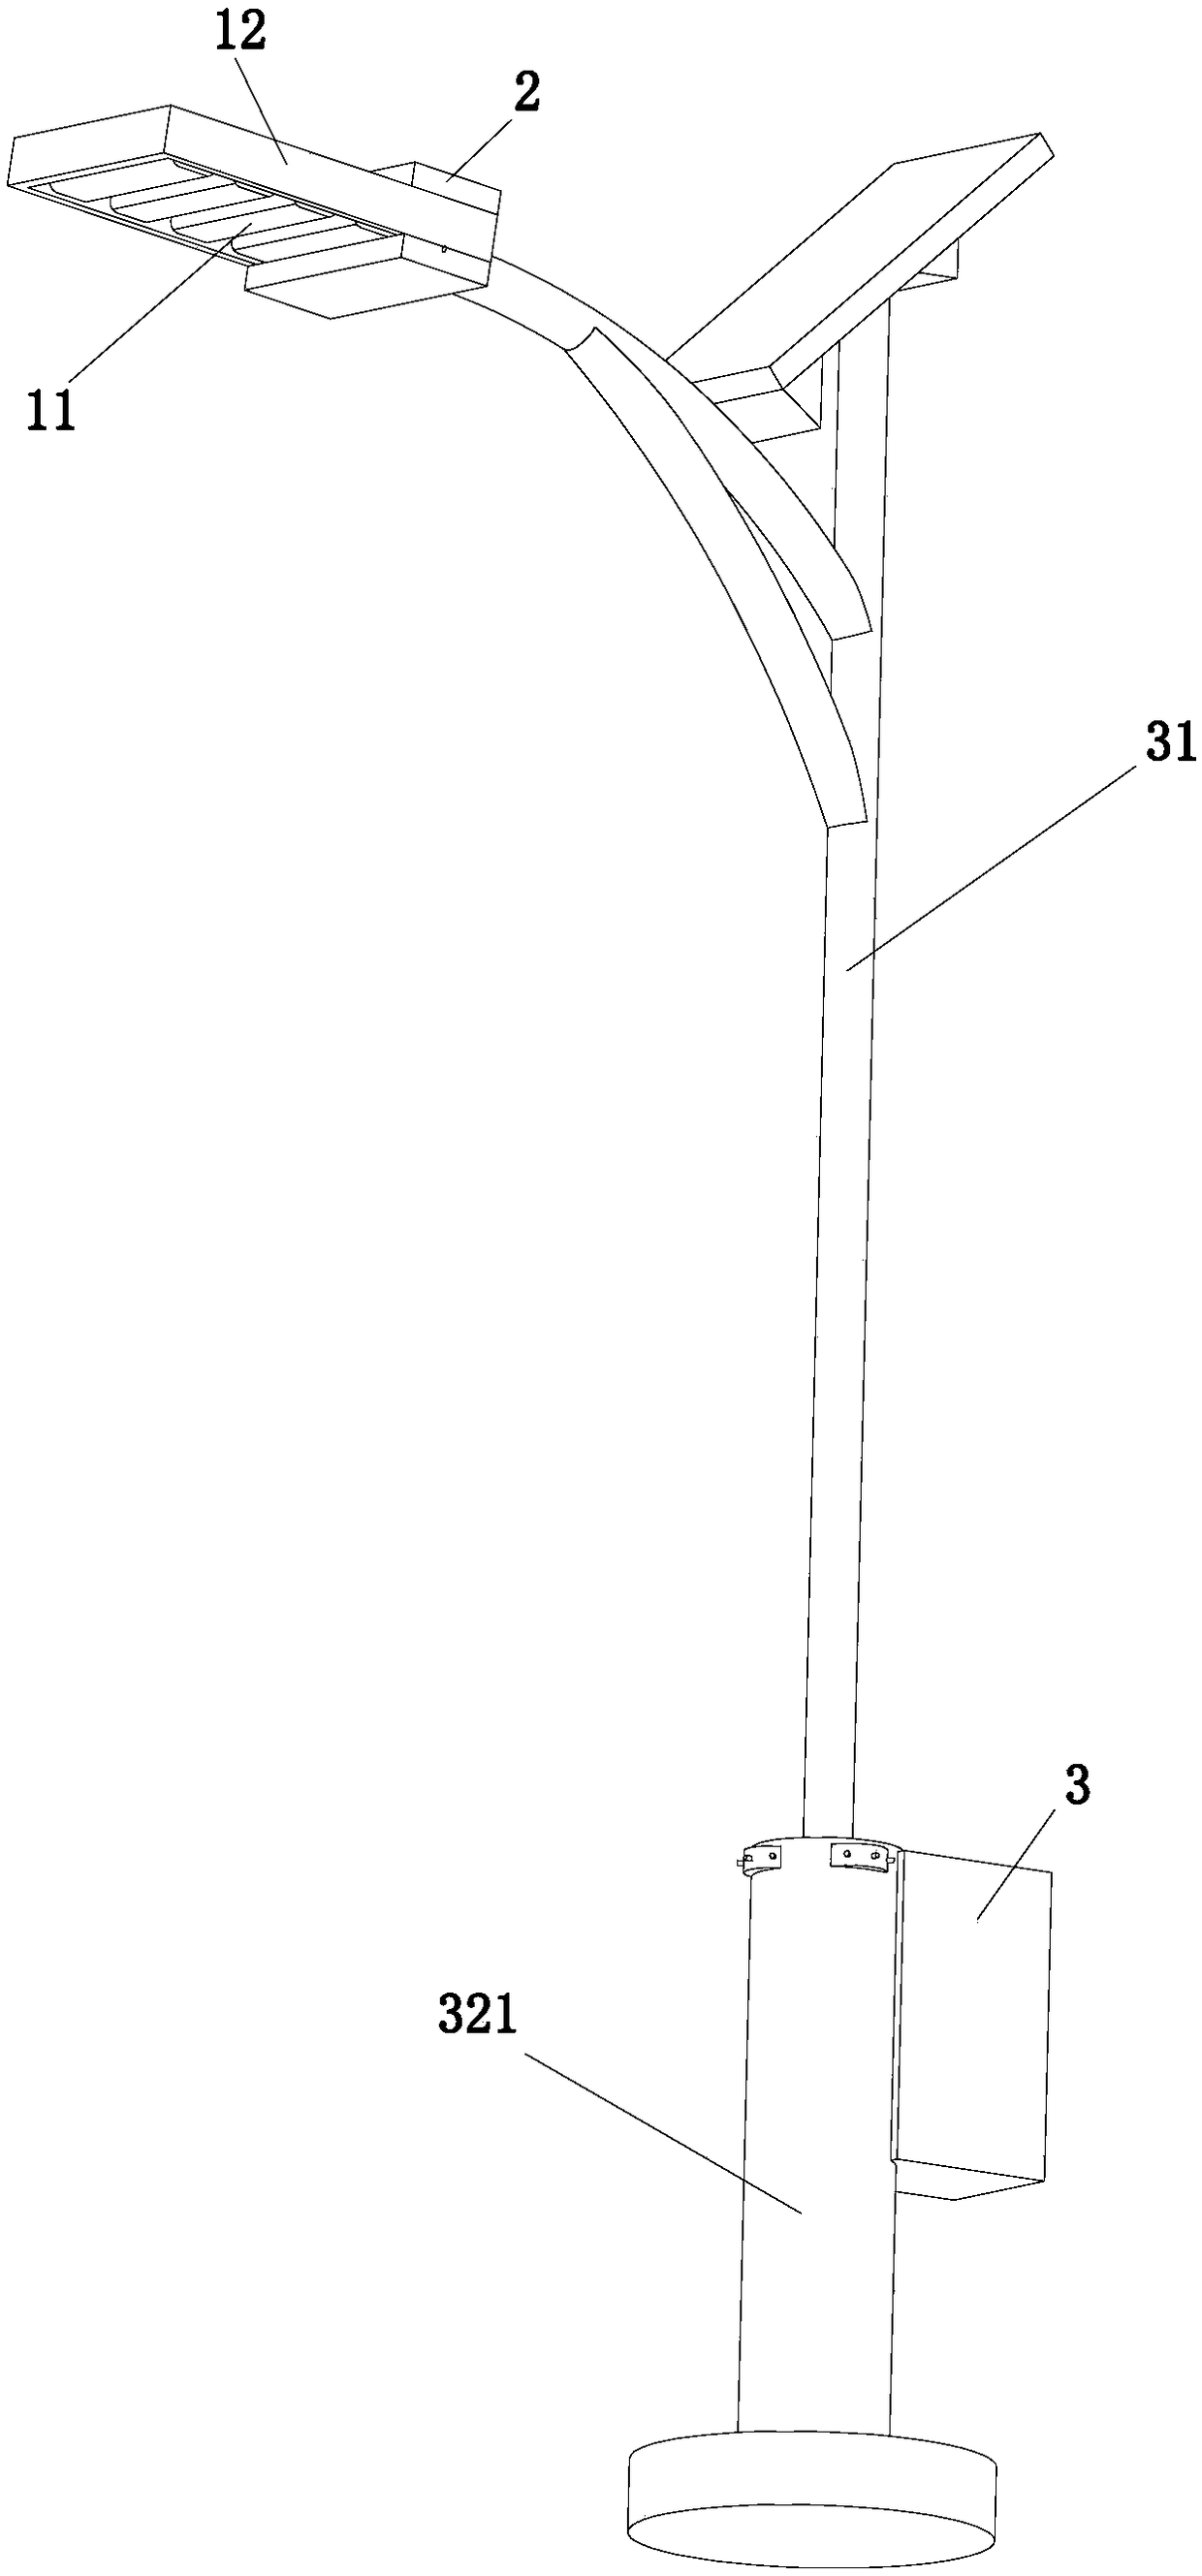 LED (Light Emitting Diode) street lamp capable of following irradiation